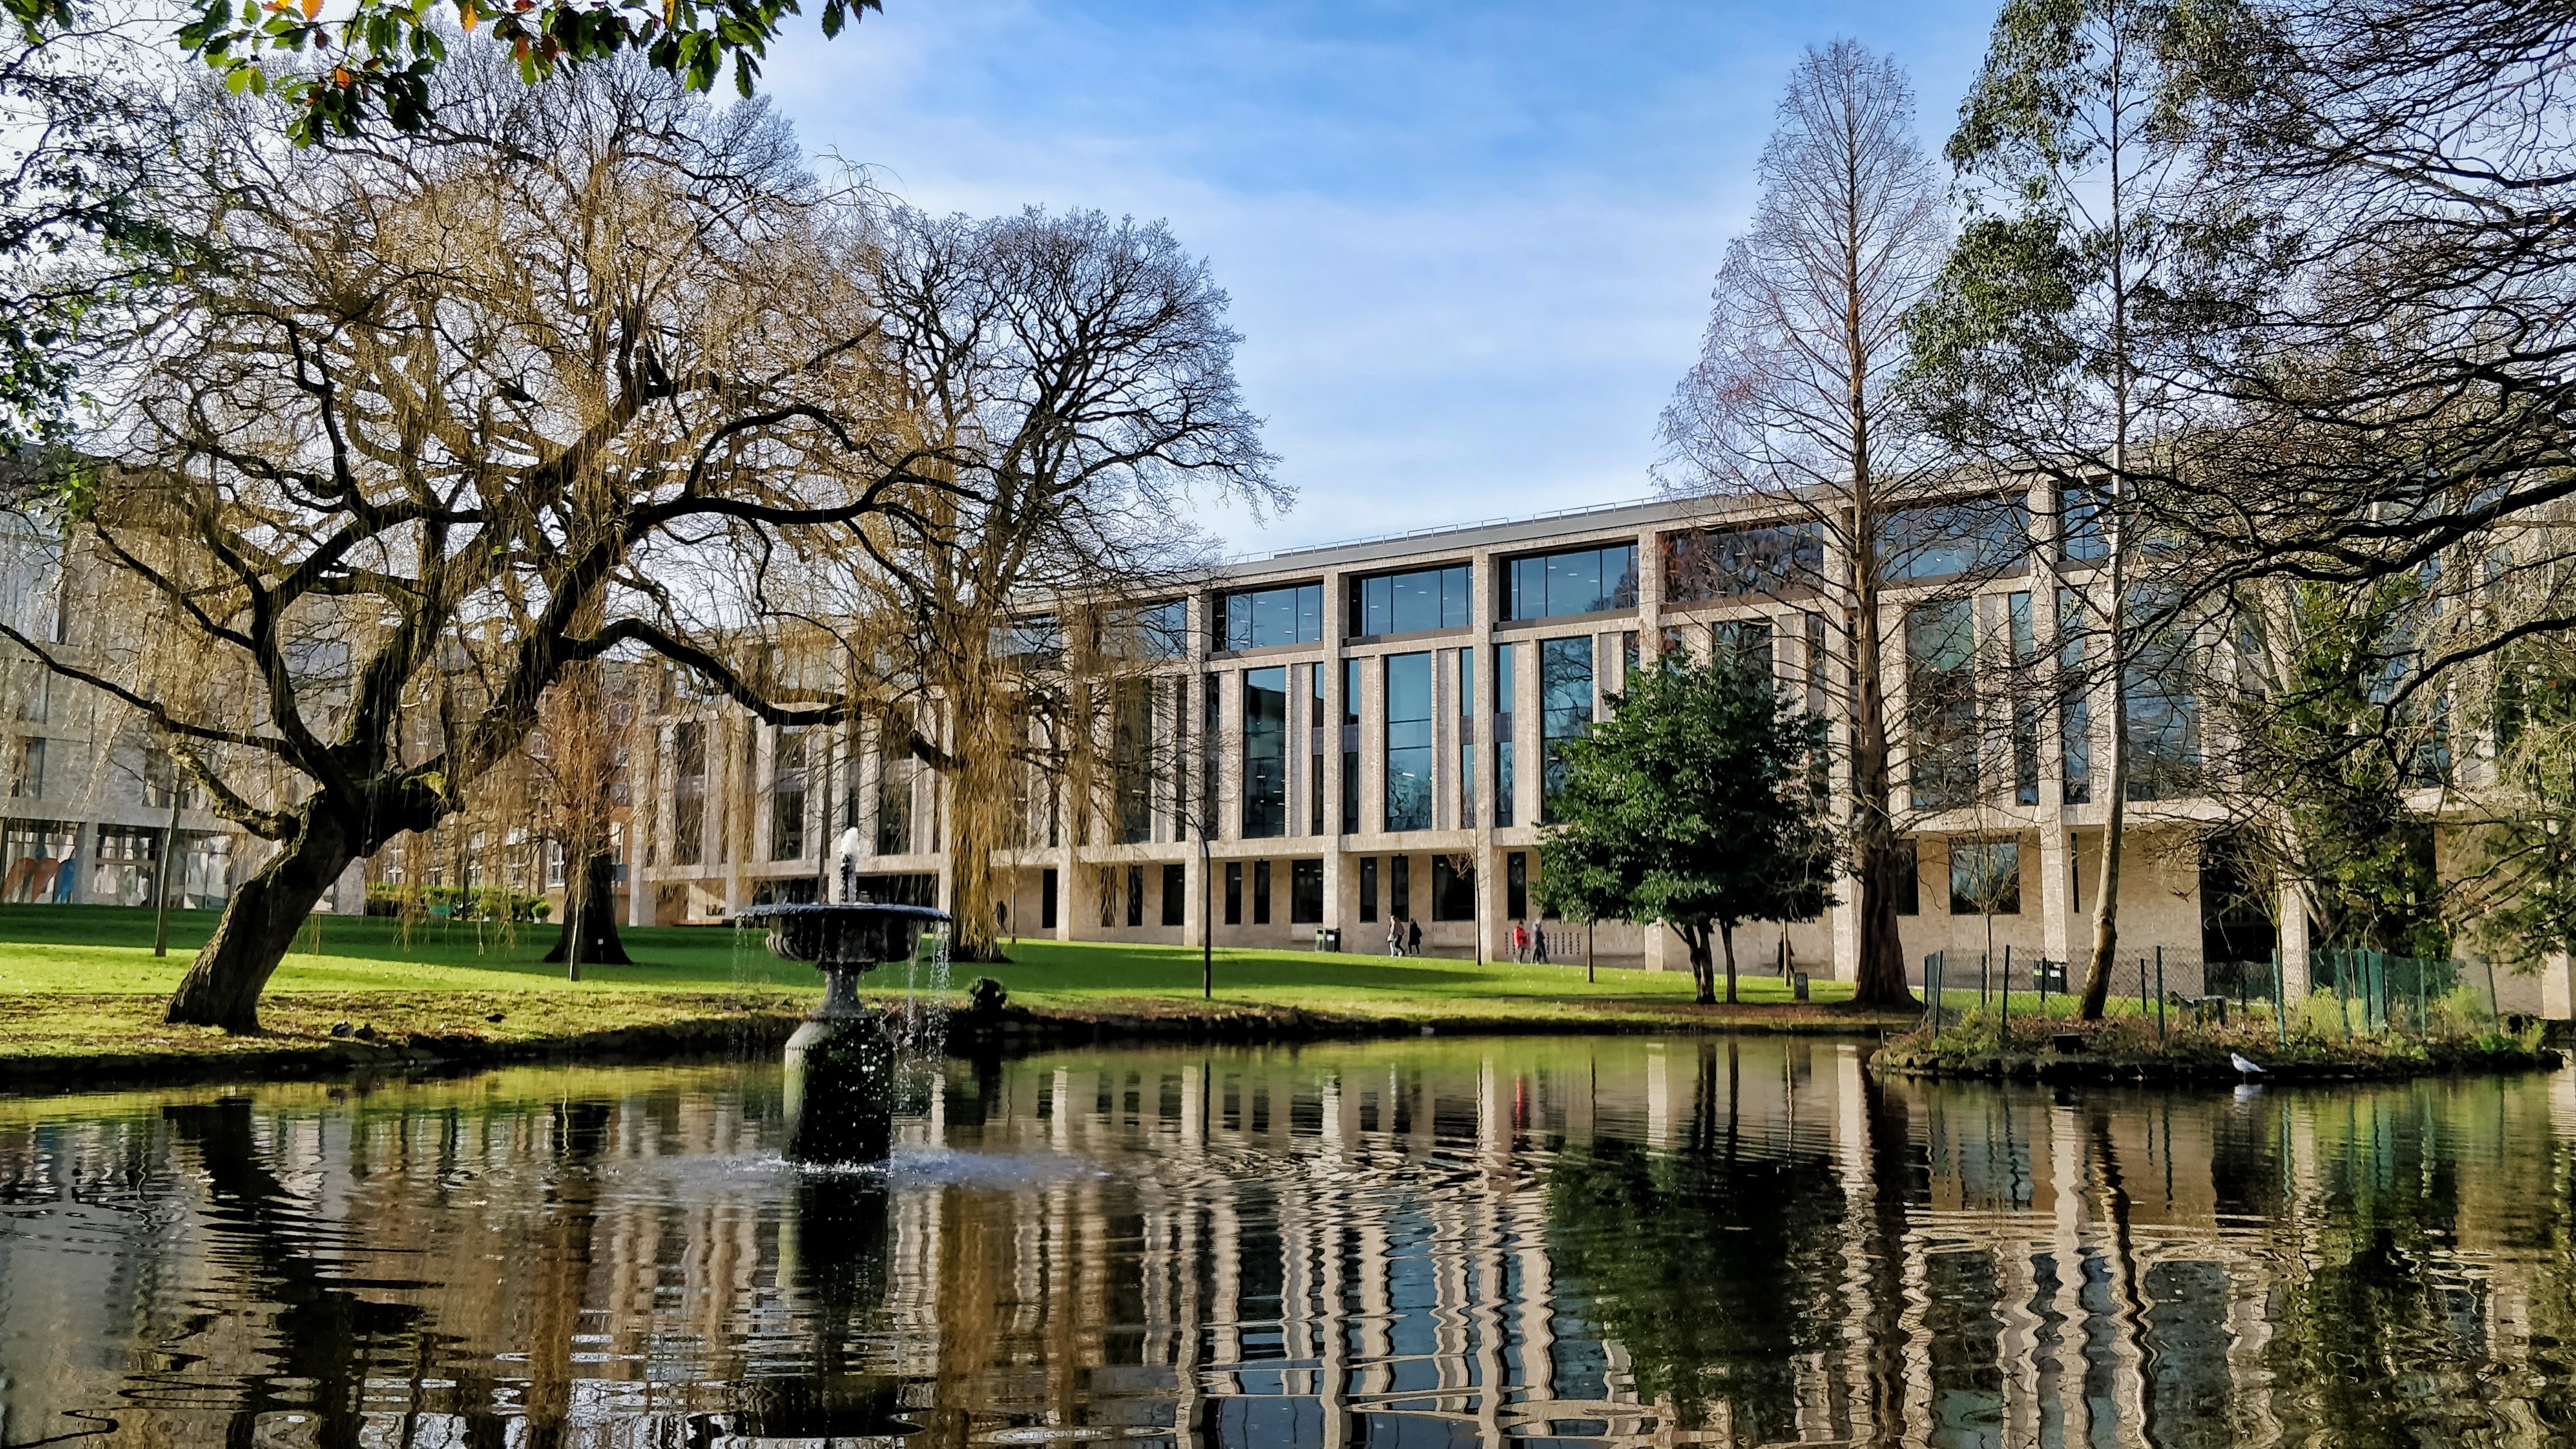 Image - Roehampton secures major grant to develop new Sustainable Engineering and Technology Education Centre